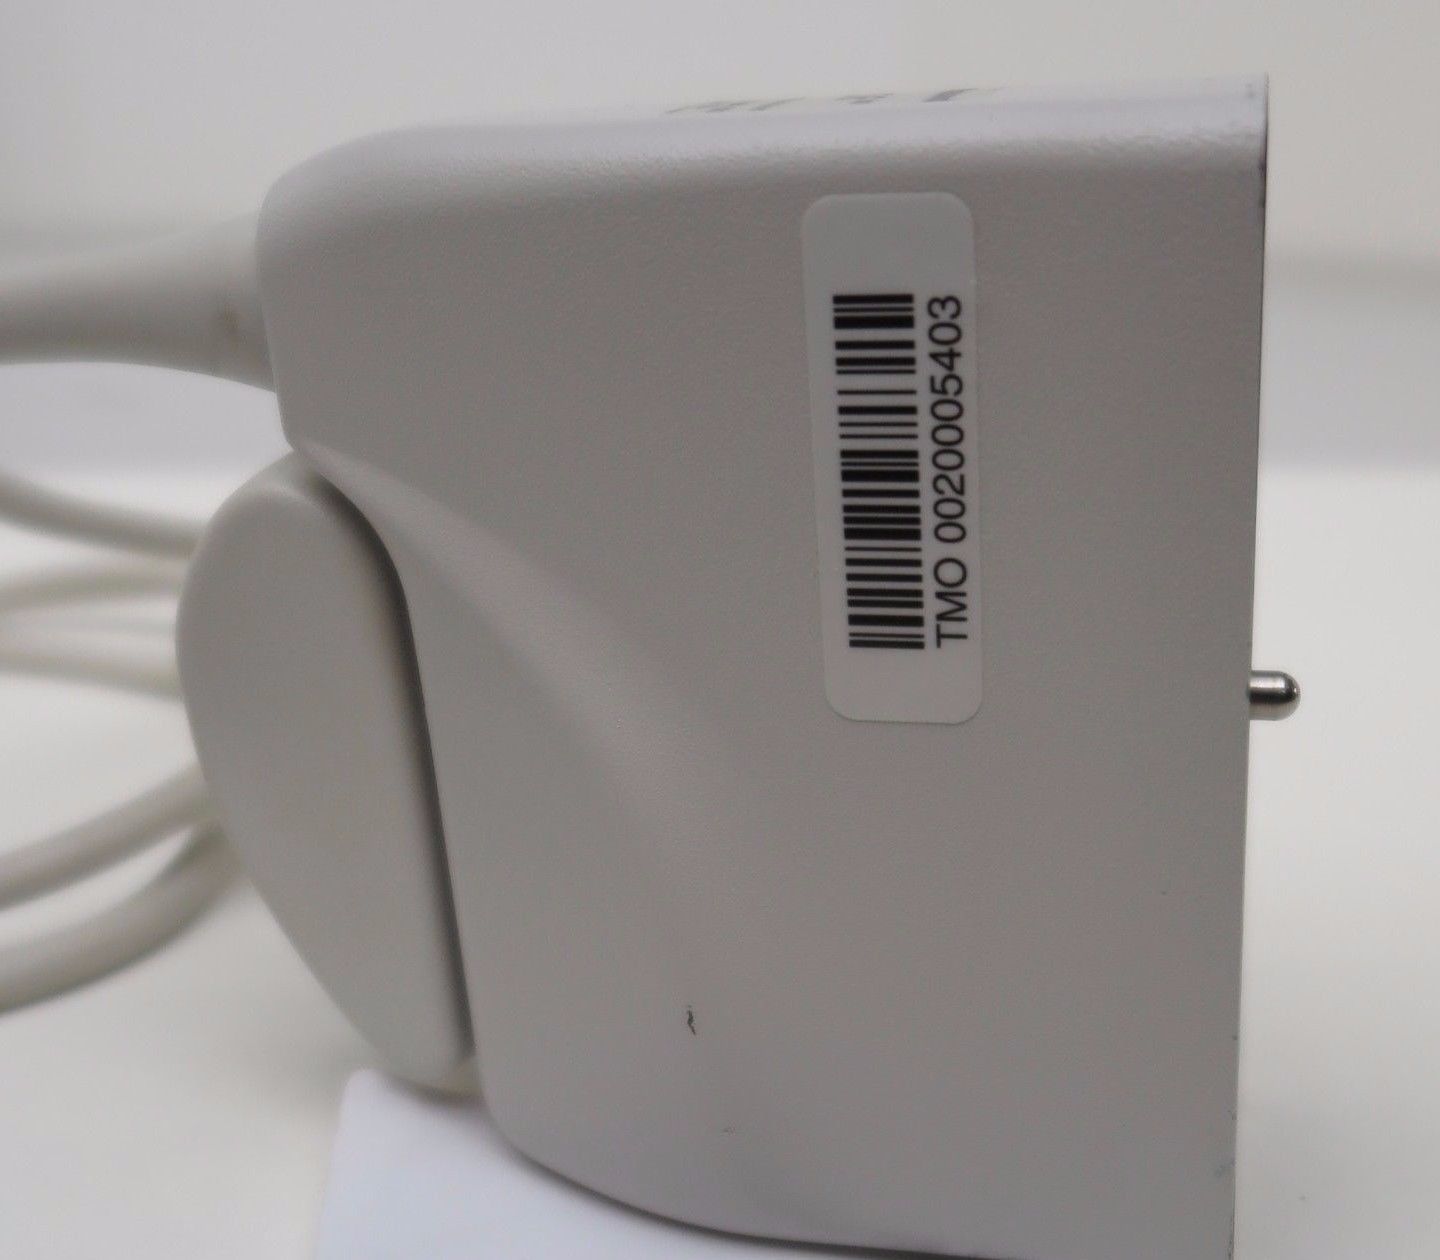 Philips X3-1 Probe Biplane sector Array Ultrasound Transducer use w/ IE33, iU22 DIAGNOSTIC ULTRASOUND MACHINES FOR SALE